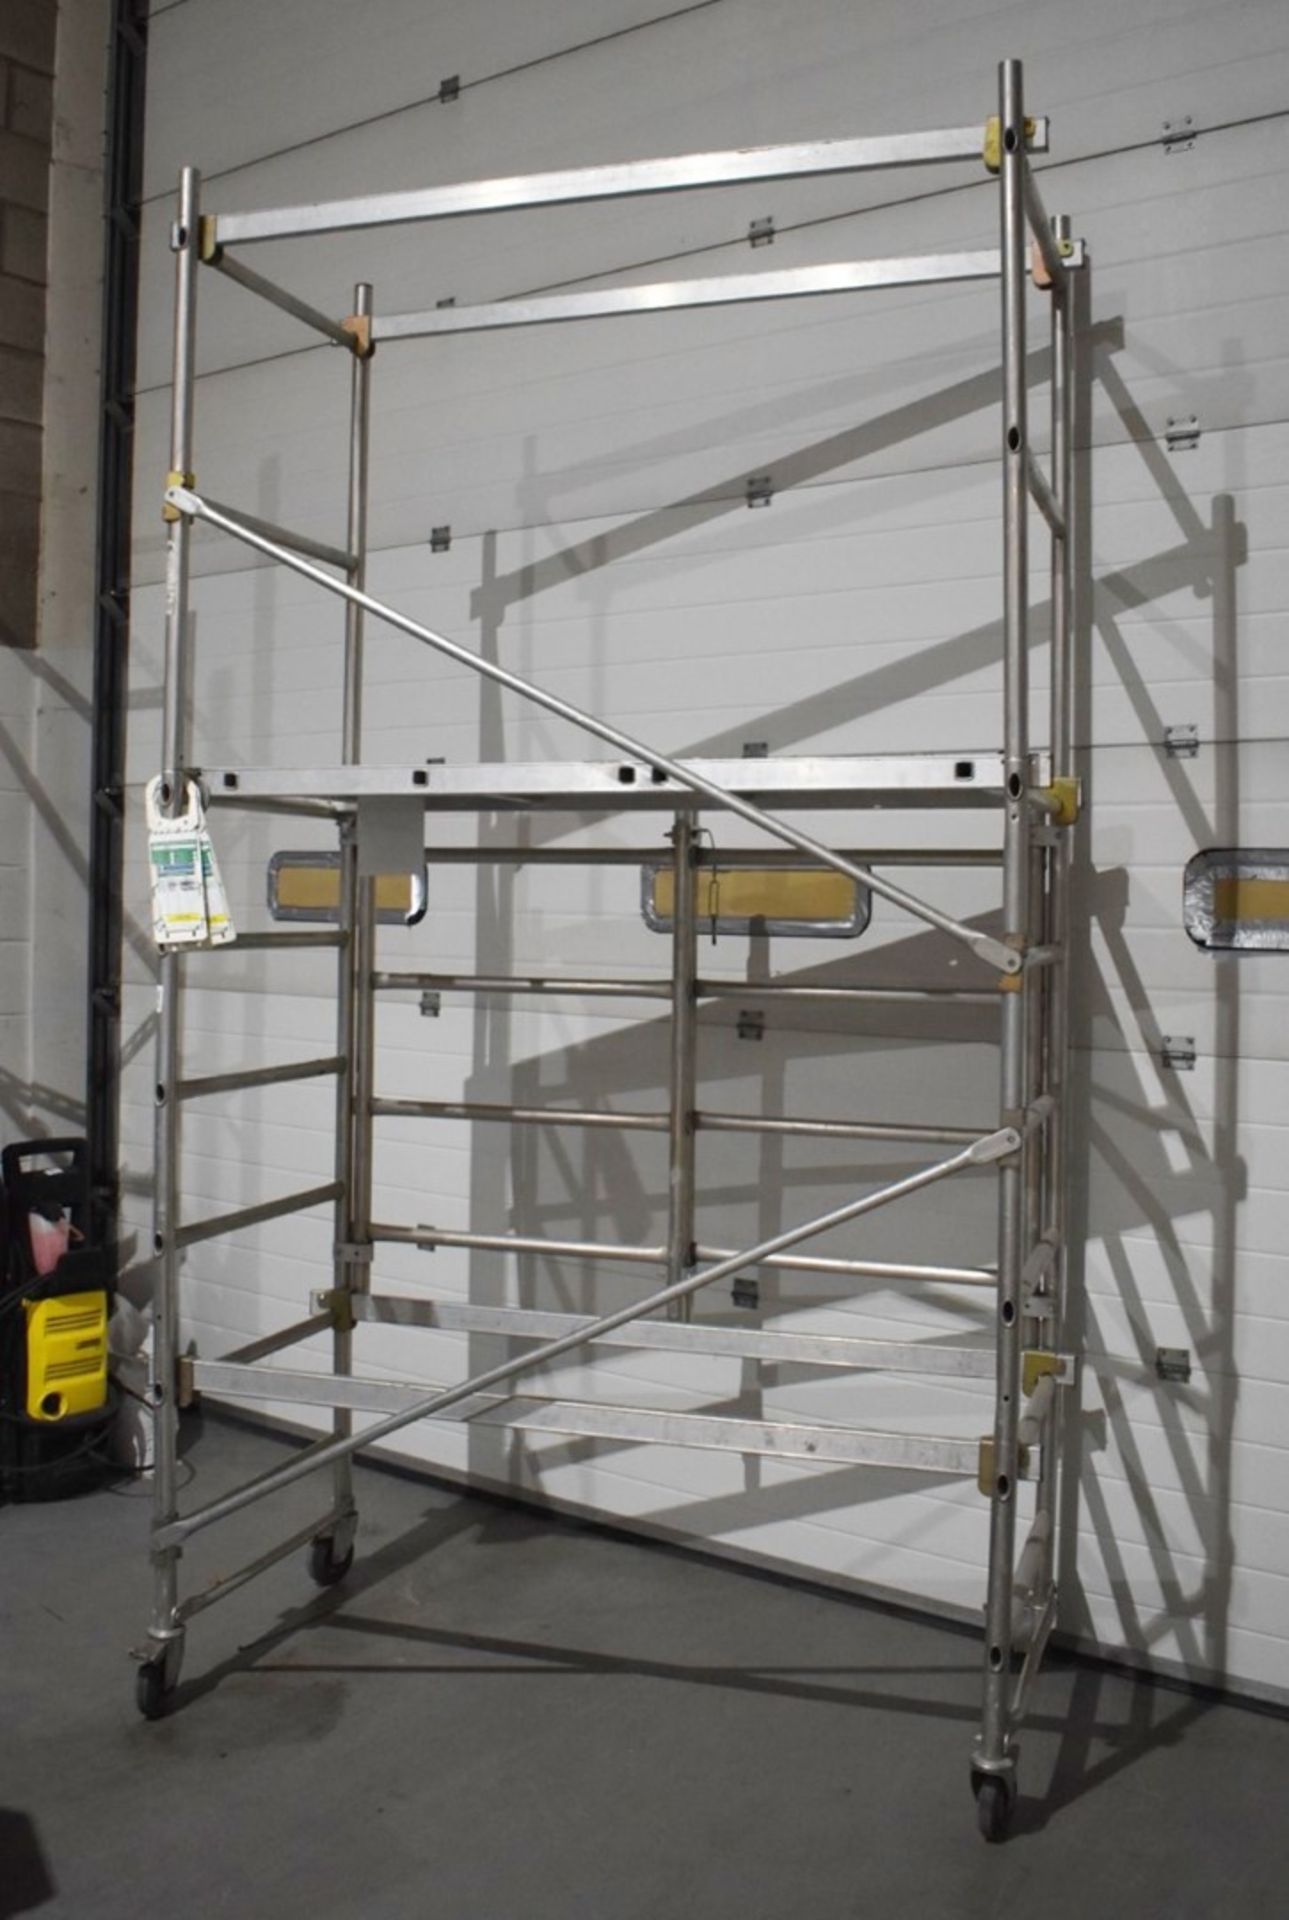 1 x Large Collection of Scaffold Tower Equipment Includes Three Mobile Scaffold Towers